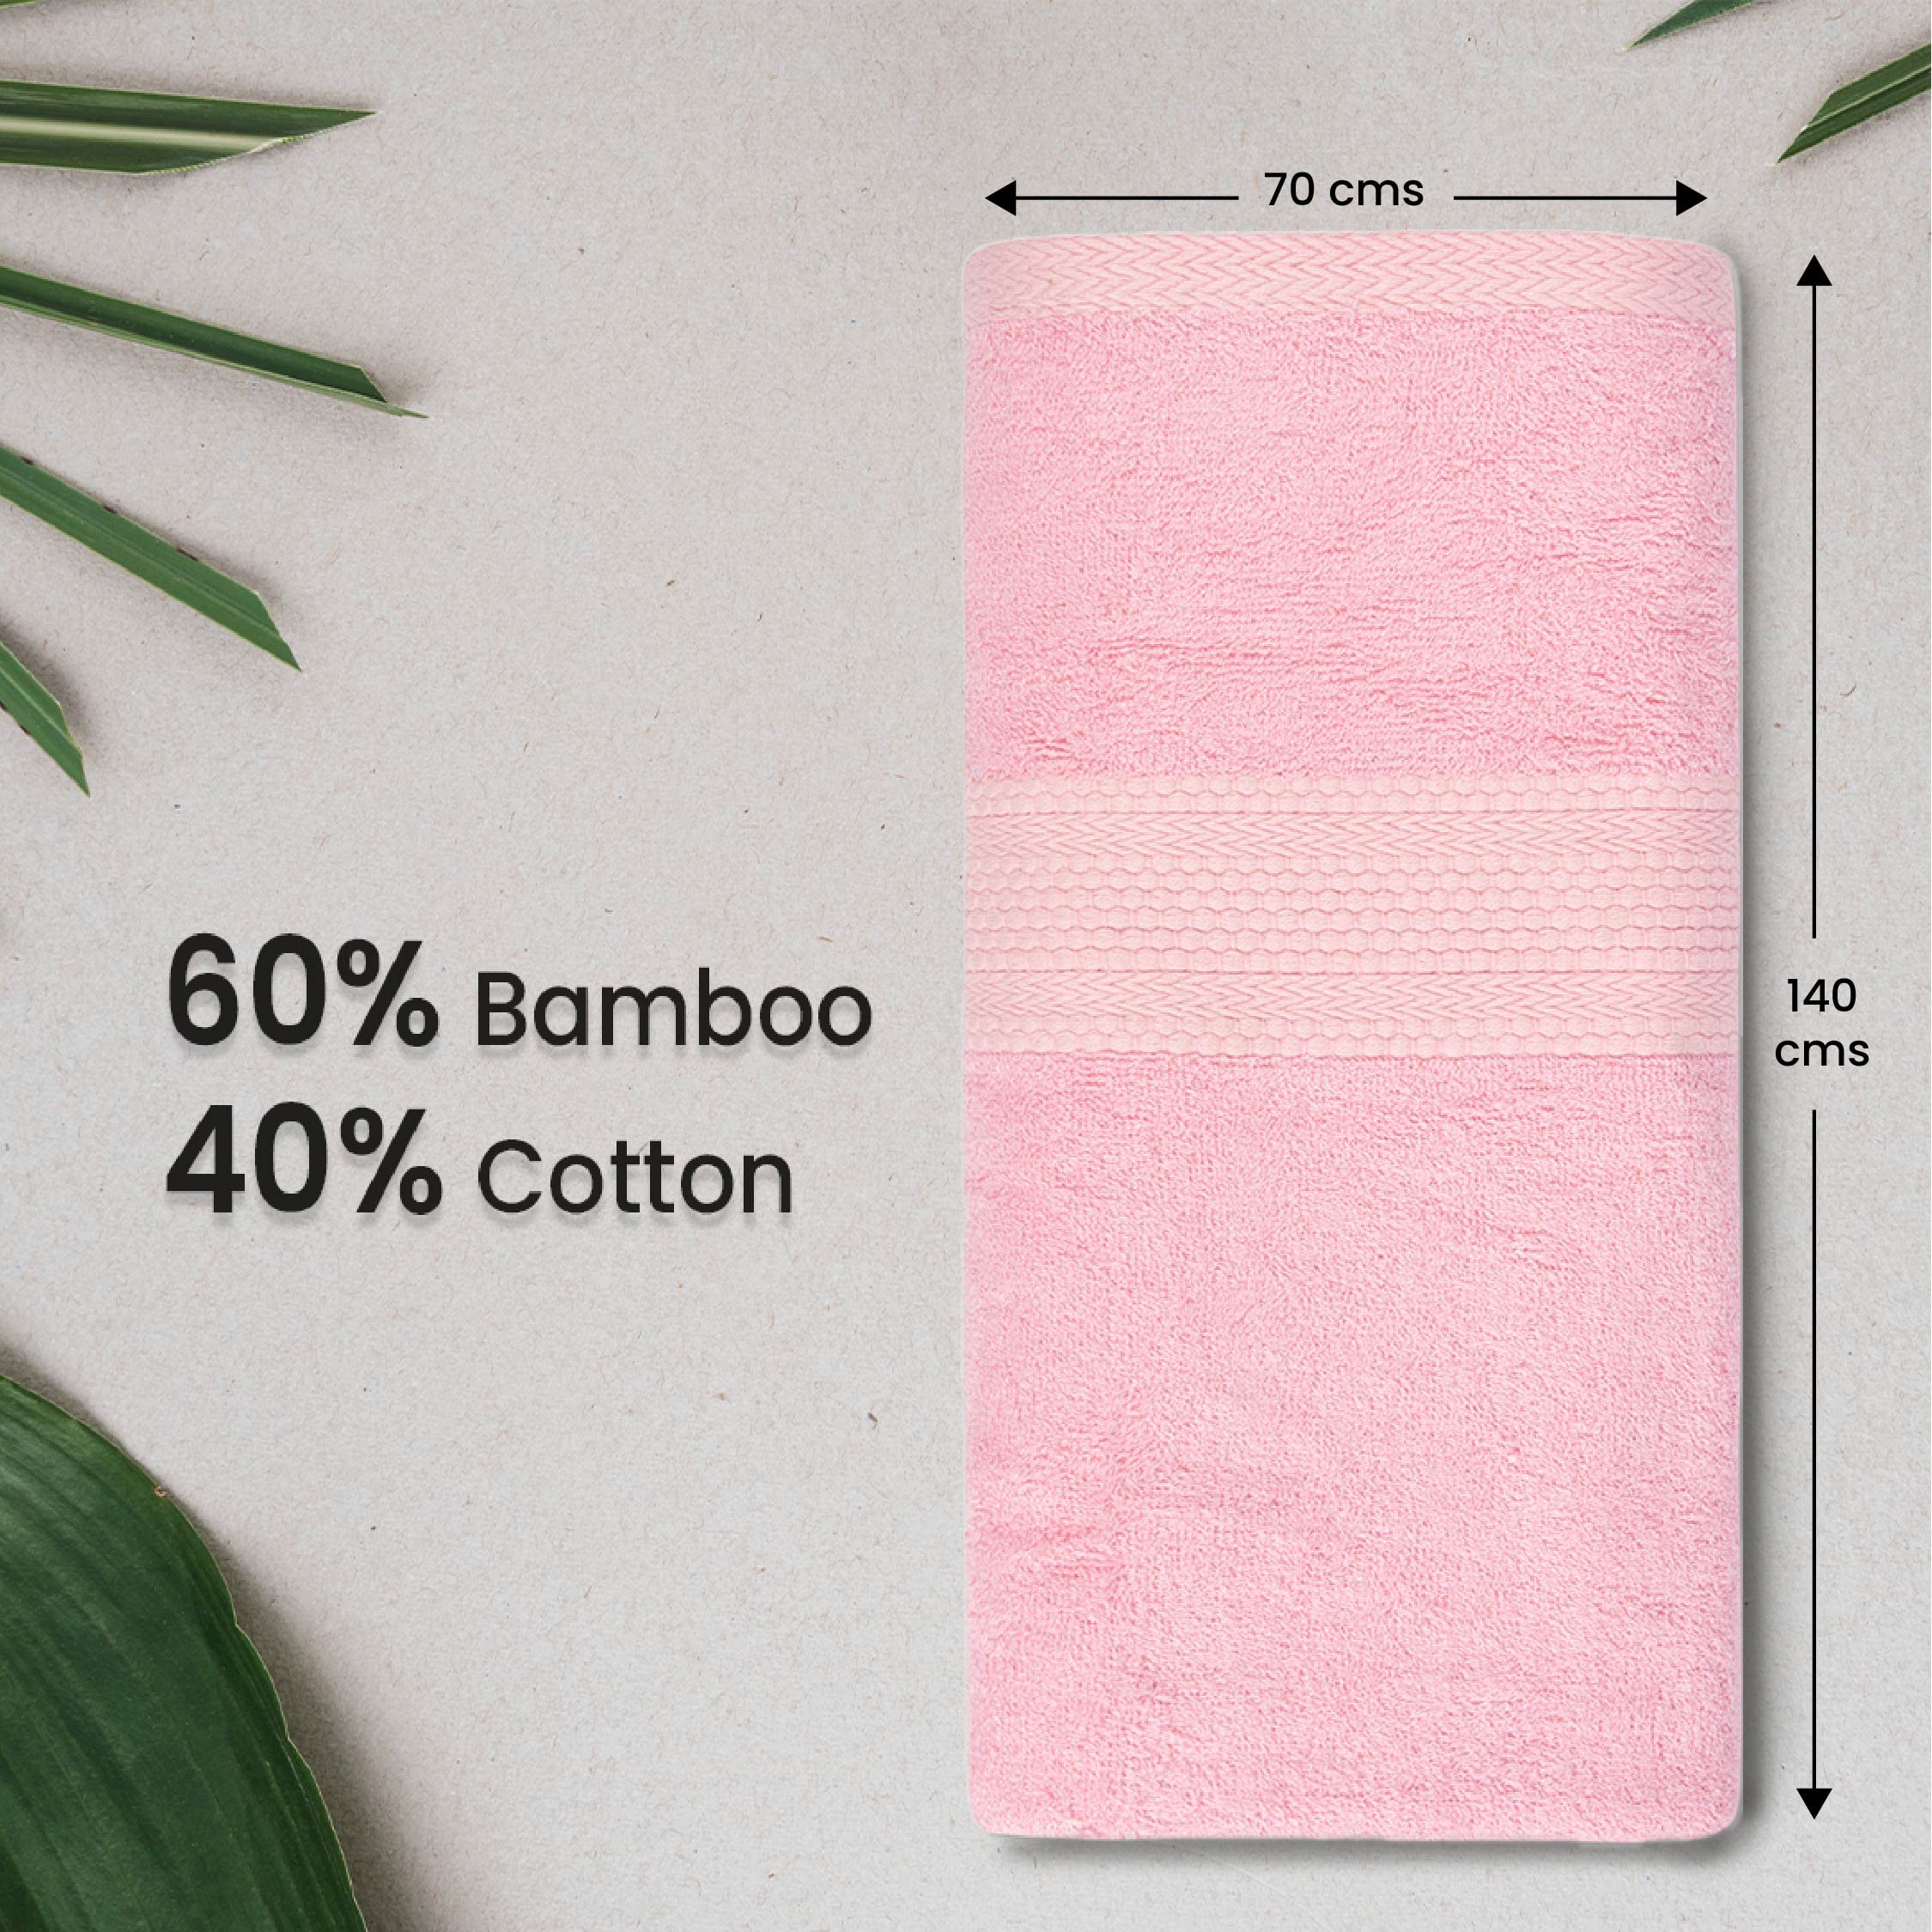 BePlush Bamboo Towels for Bath Large Size | Ultra Soft, Highly Absorbent, Quick Dry, Anti Bacterial Bamboo Bath Towel for Men & Women || 450 GSM, 27 x 55 Inches (1, Pink)